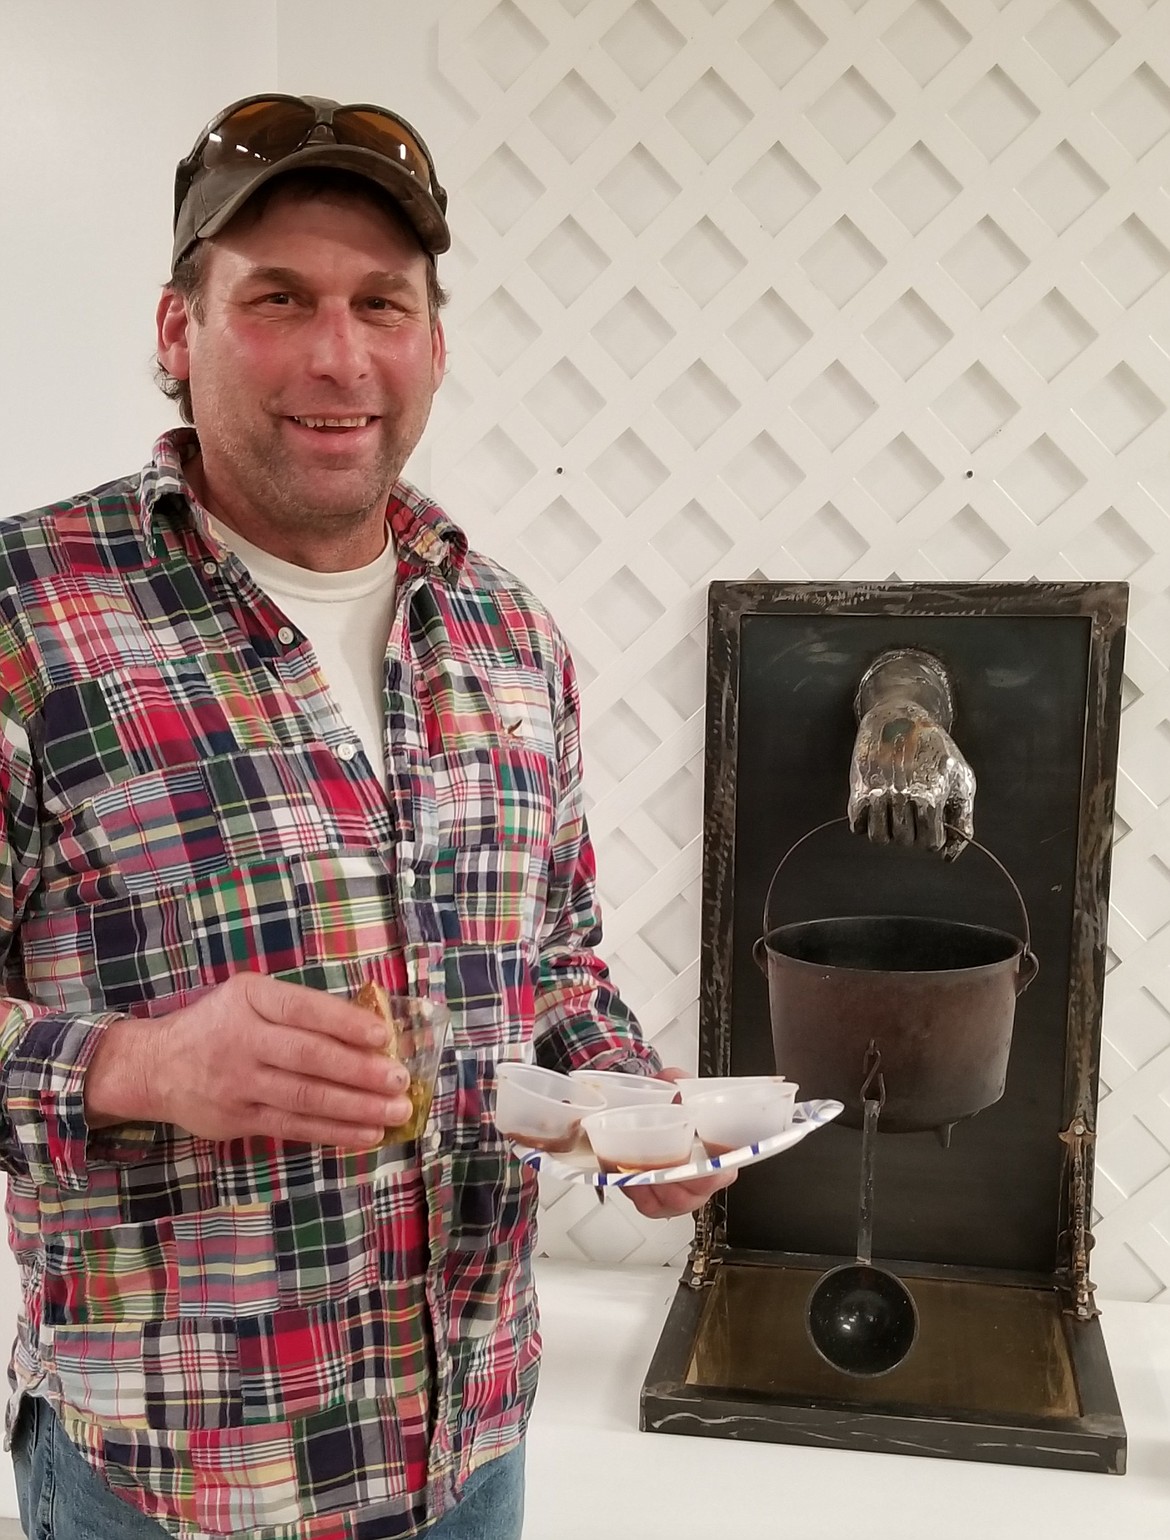 Photo by MANDI BATEMAN
Artist Mike Krejci, in front of the trophy he created, and holding a plate full of chili samples.